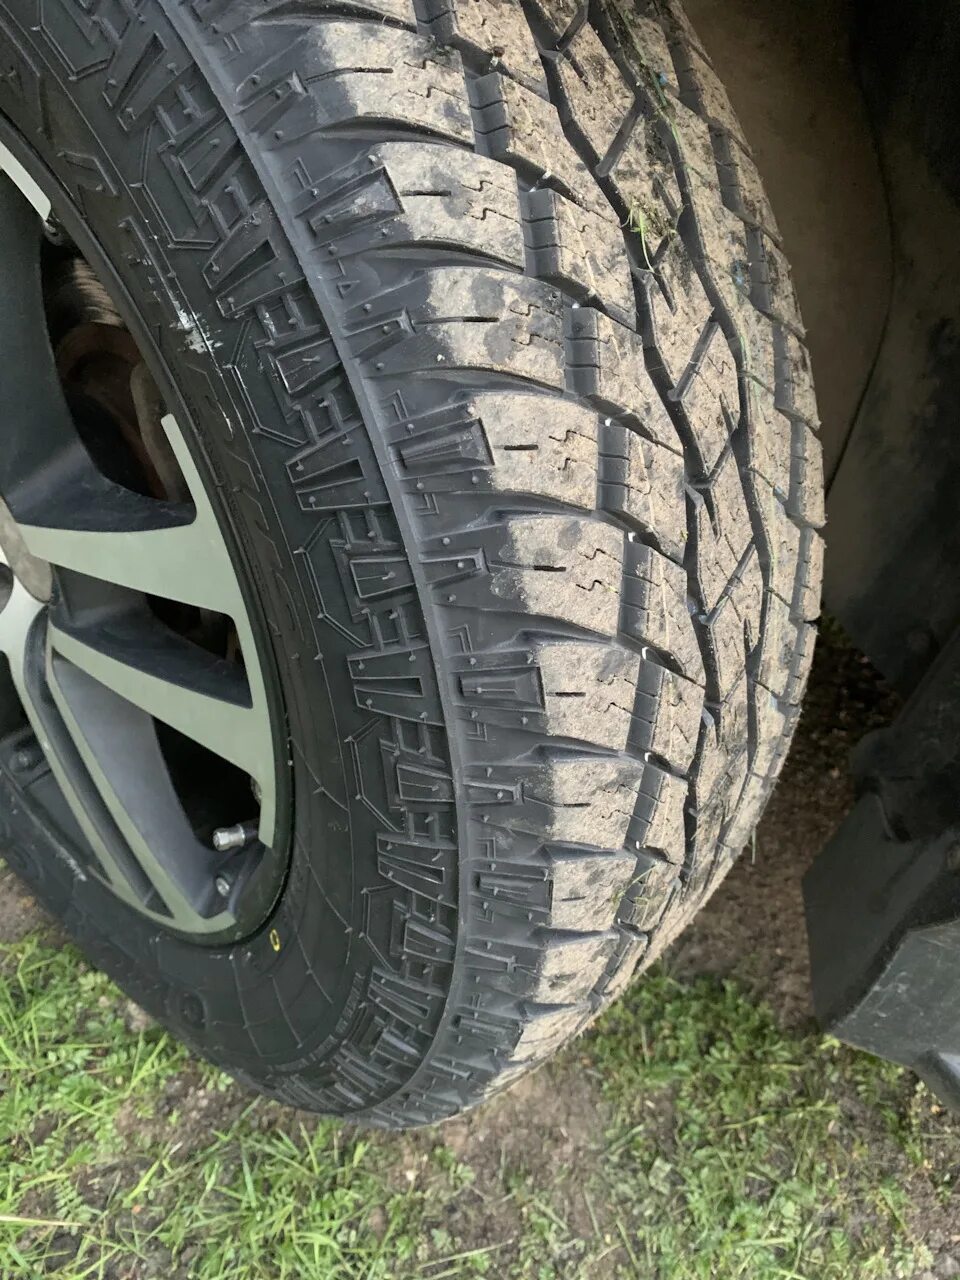 A t 215 60 r17. Toyo at open Country Plus 235/65/17. Toyo open Country a/t 215/60 r17. Toyo open Country a/t Plus 235/65 r17. Toyo open Country a/t 215/75 r15.